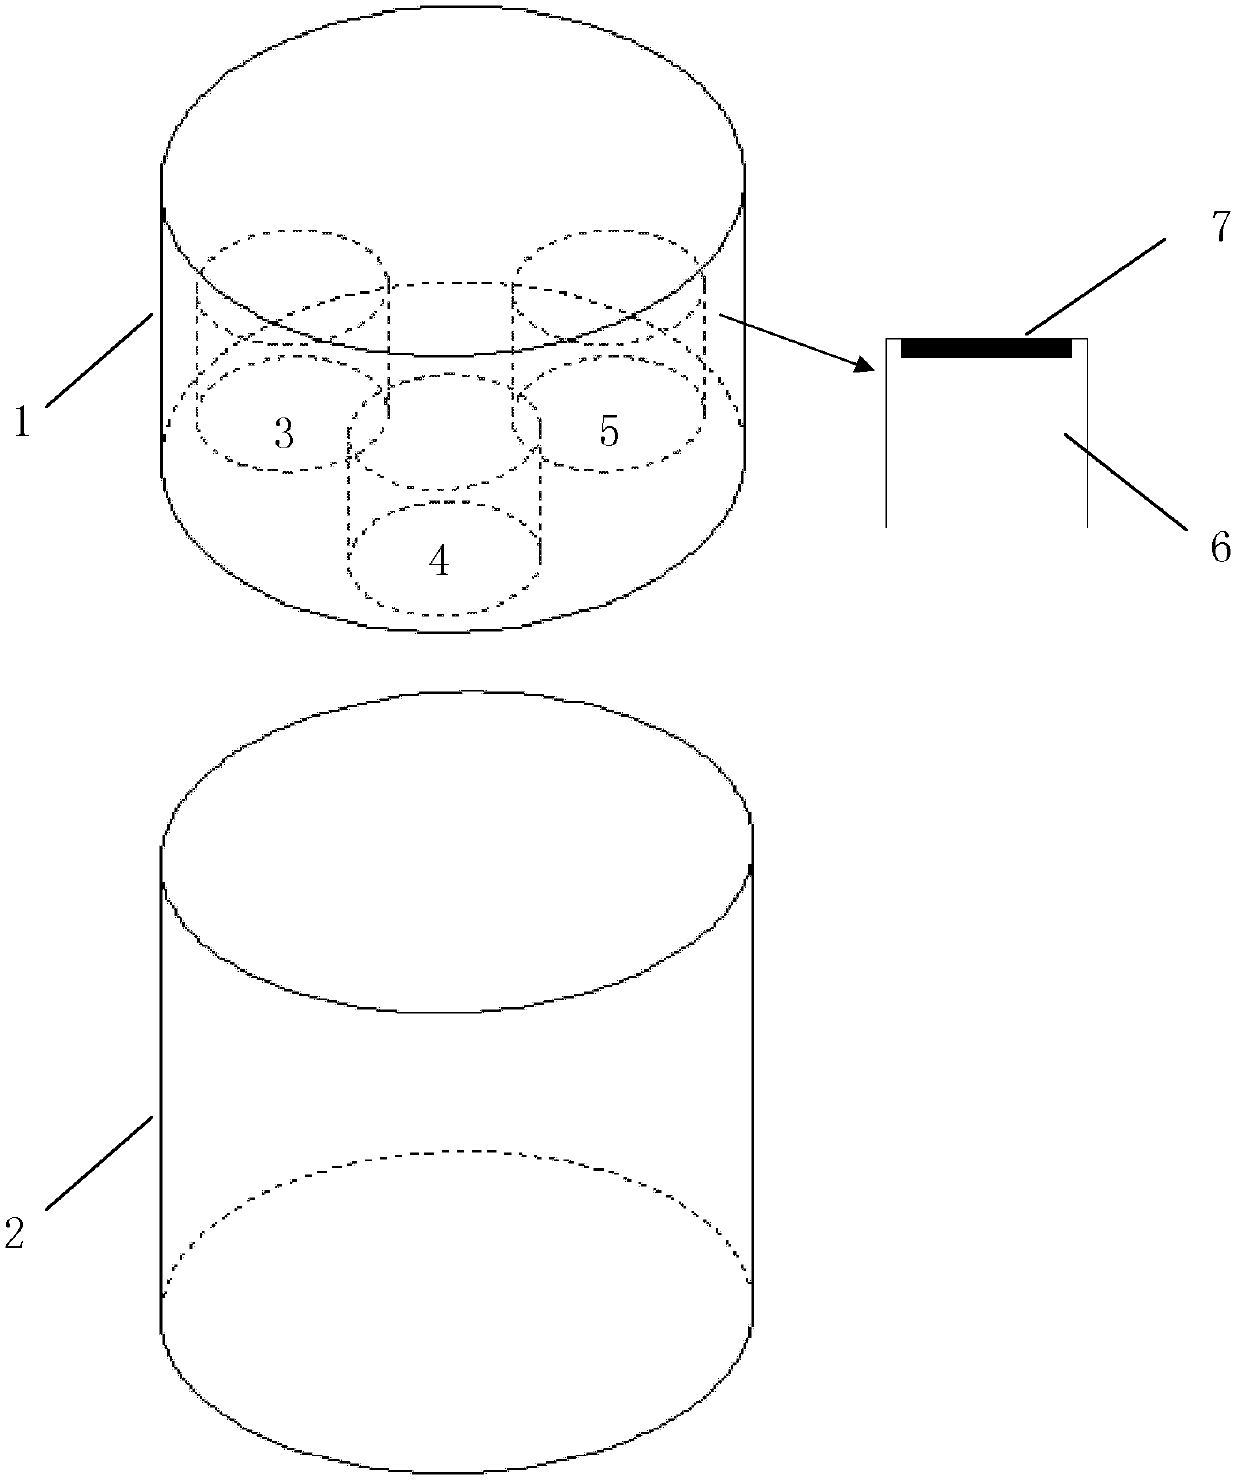 Crucible for growing silicon carbide monocrystal and having multiple growth cavities